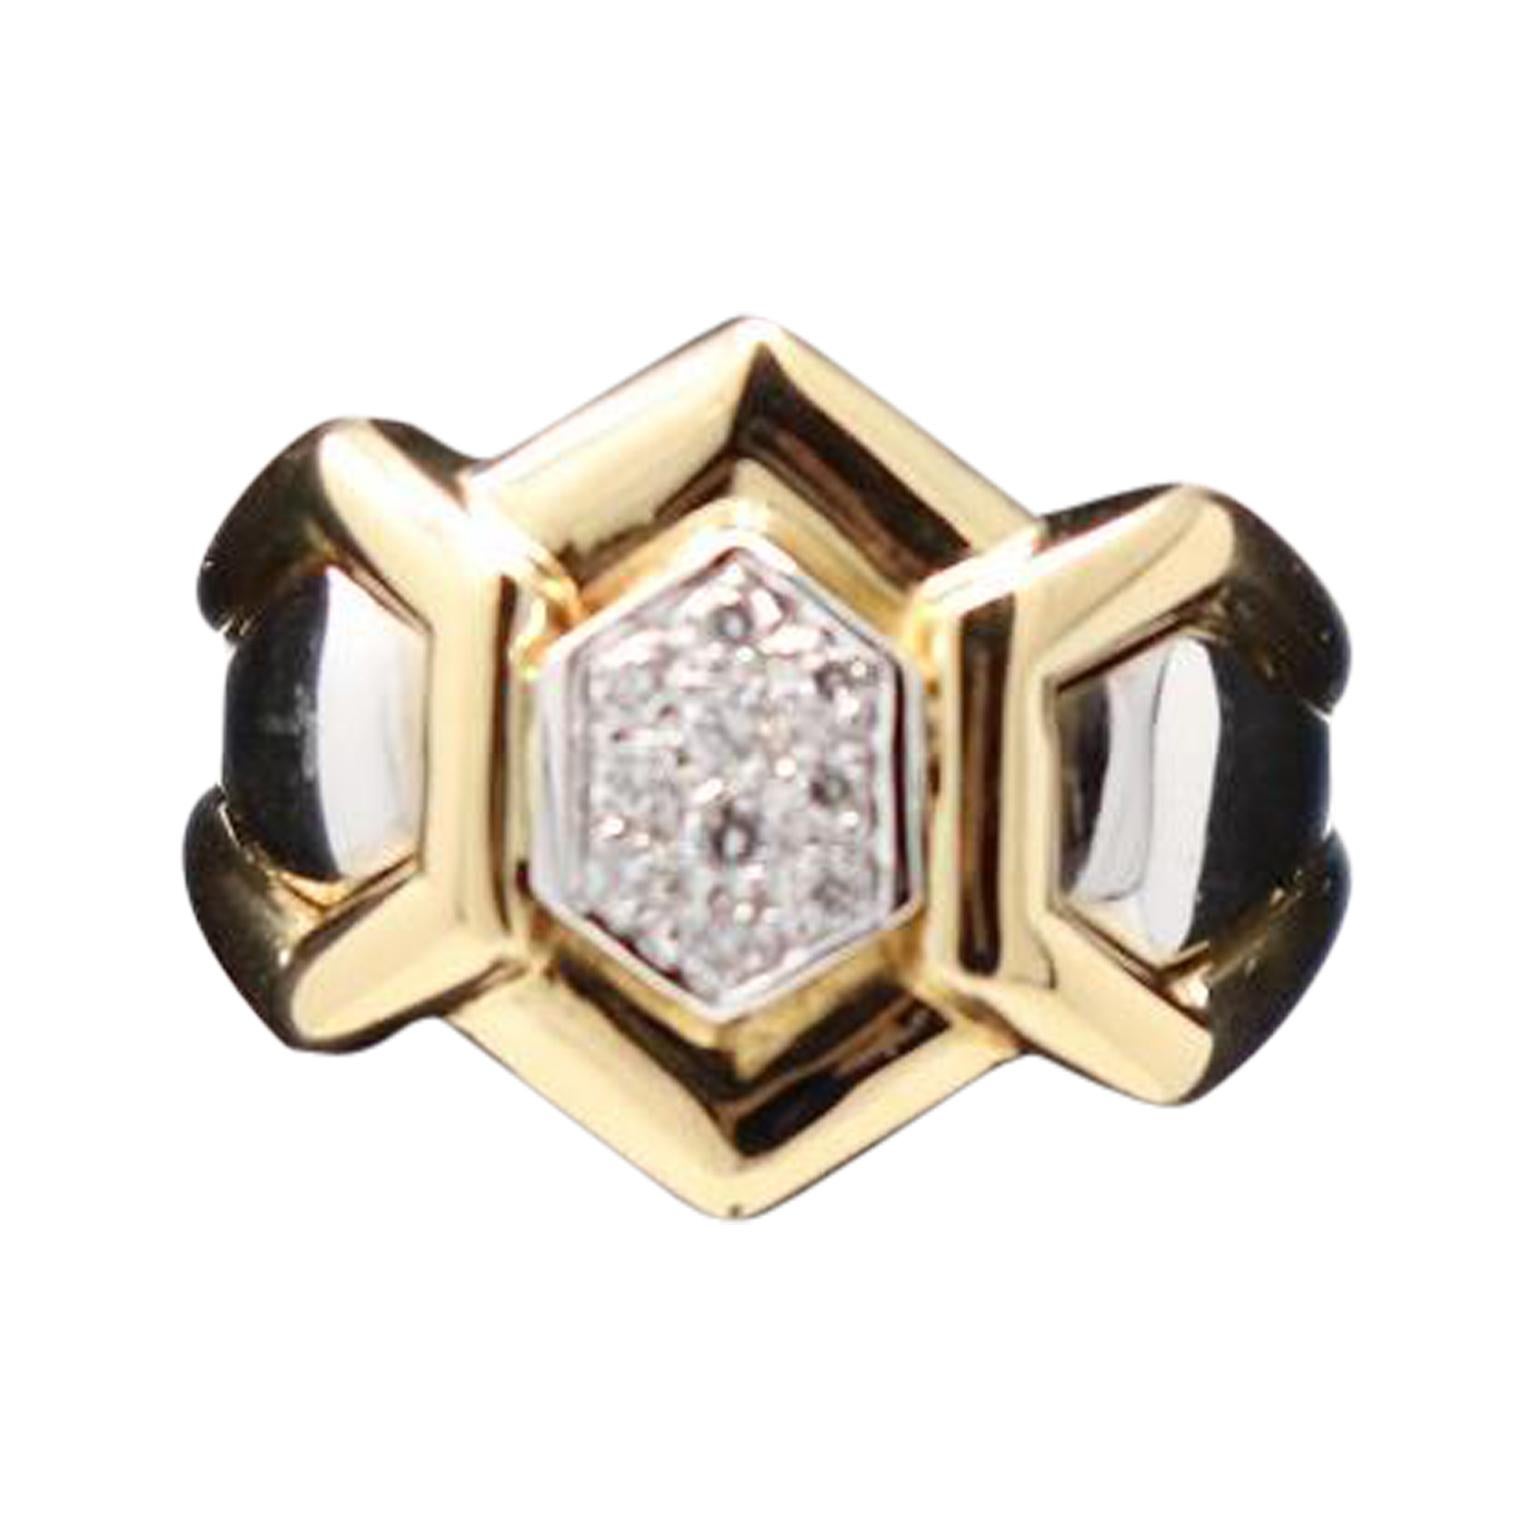 Gold and 0.12 Carat Diamonds Signert Ring by Gianni Carità For Sale